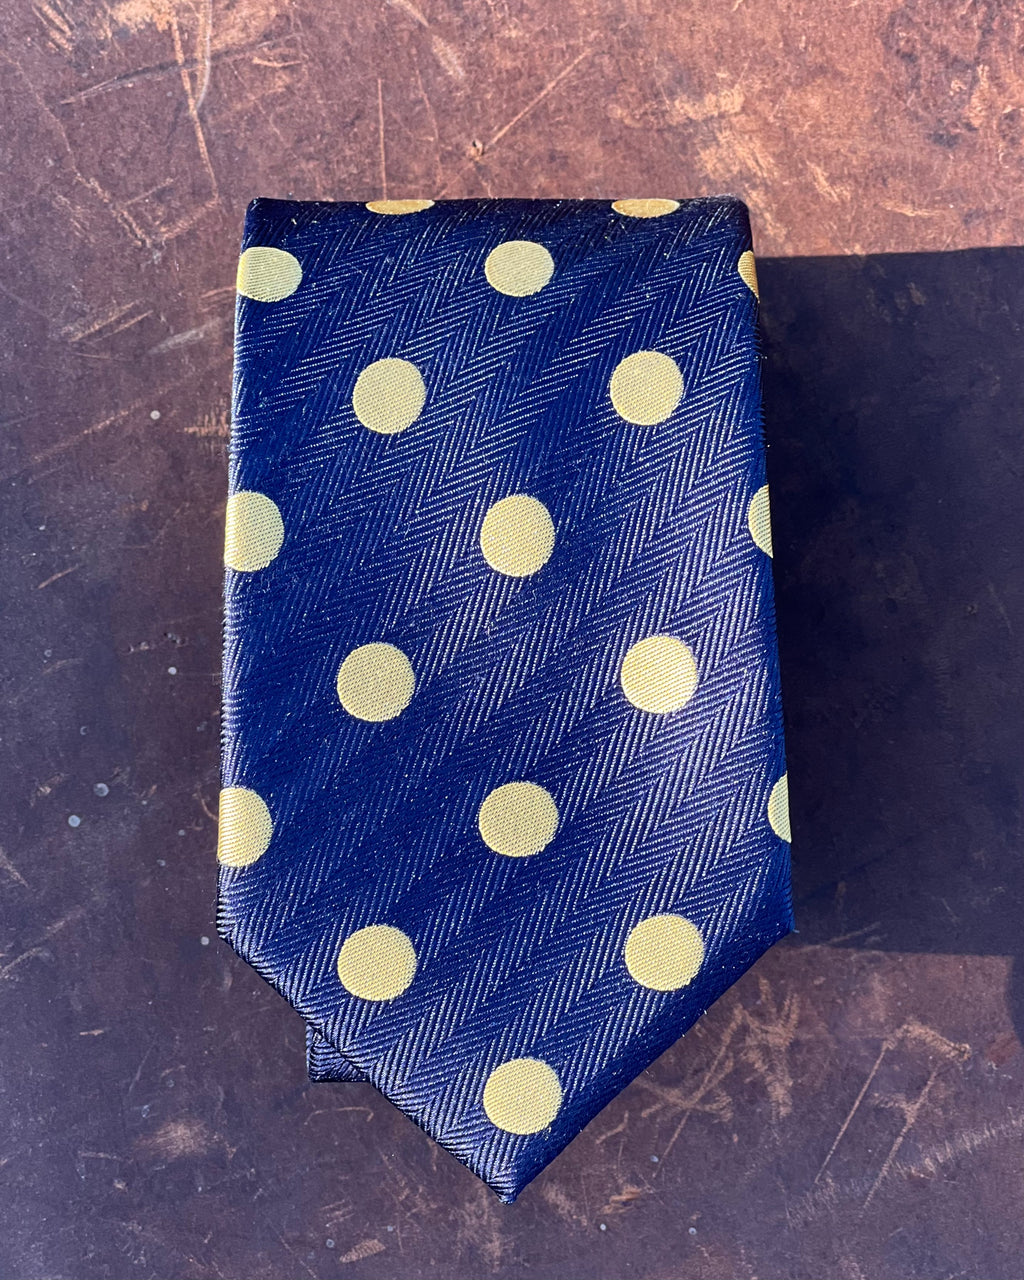 Pure silk tie featuring gold spots on blue background